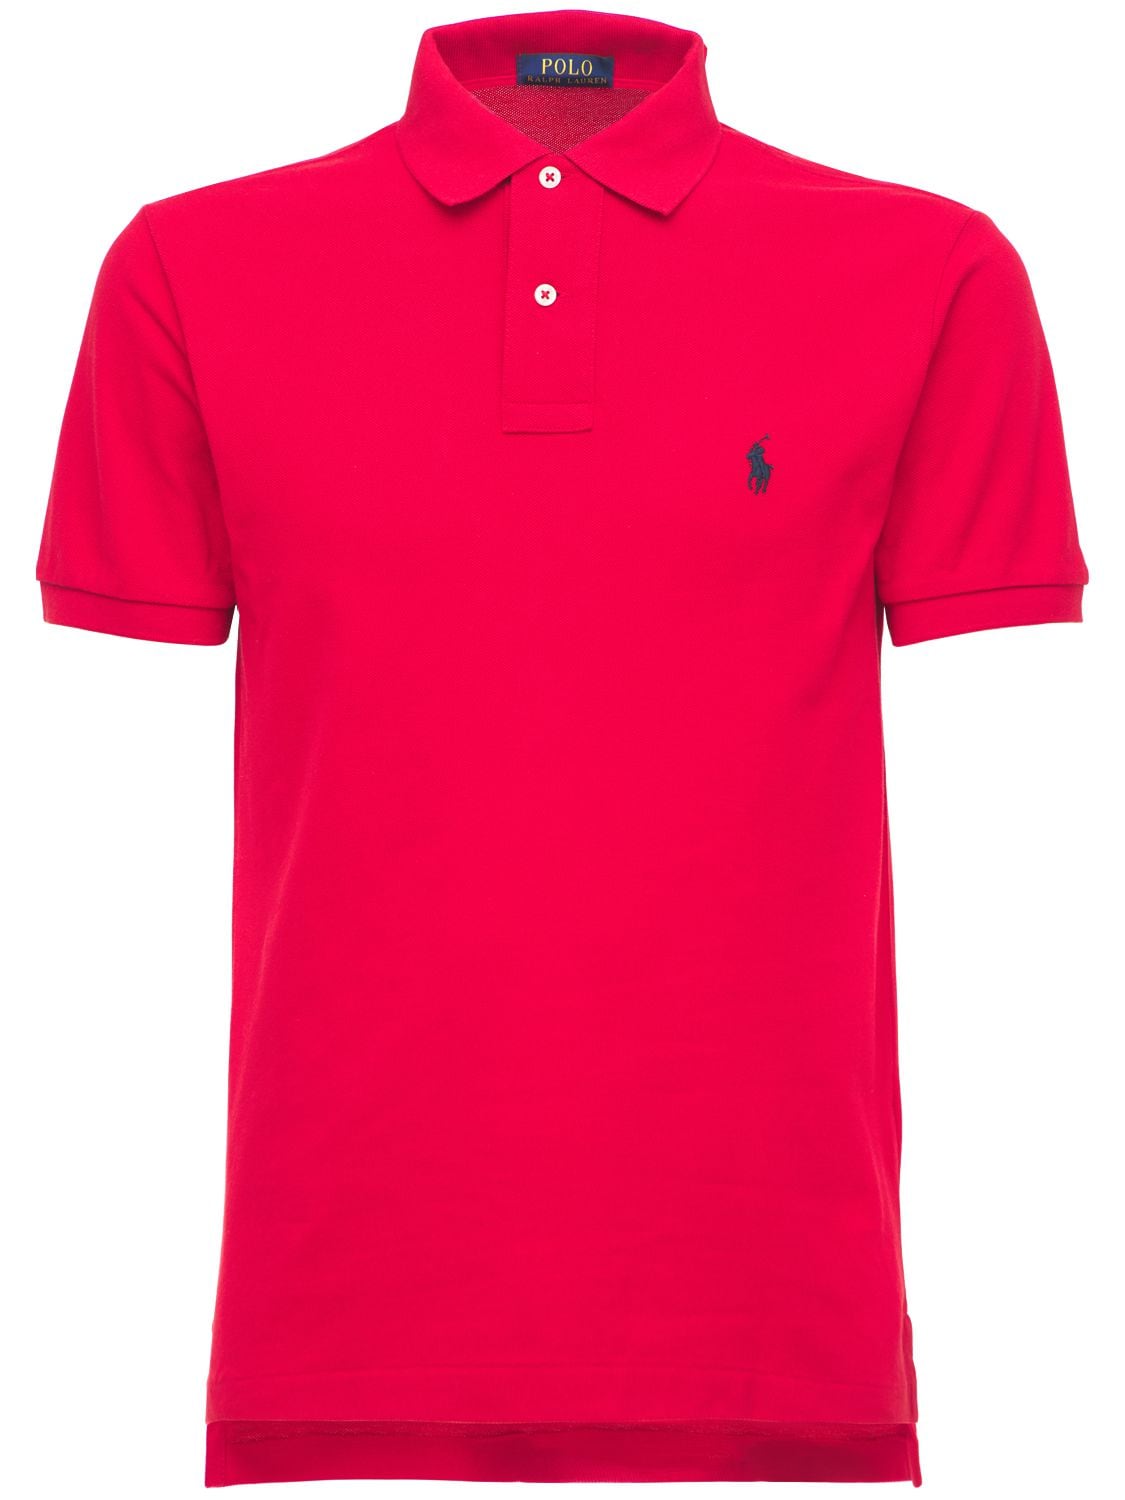 Polo Ralph Lauren Classic Slim Fit Cotton Piqué Polo Shirt In Red